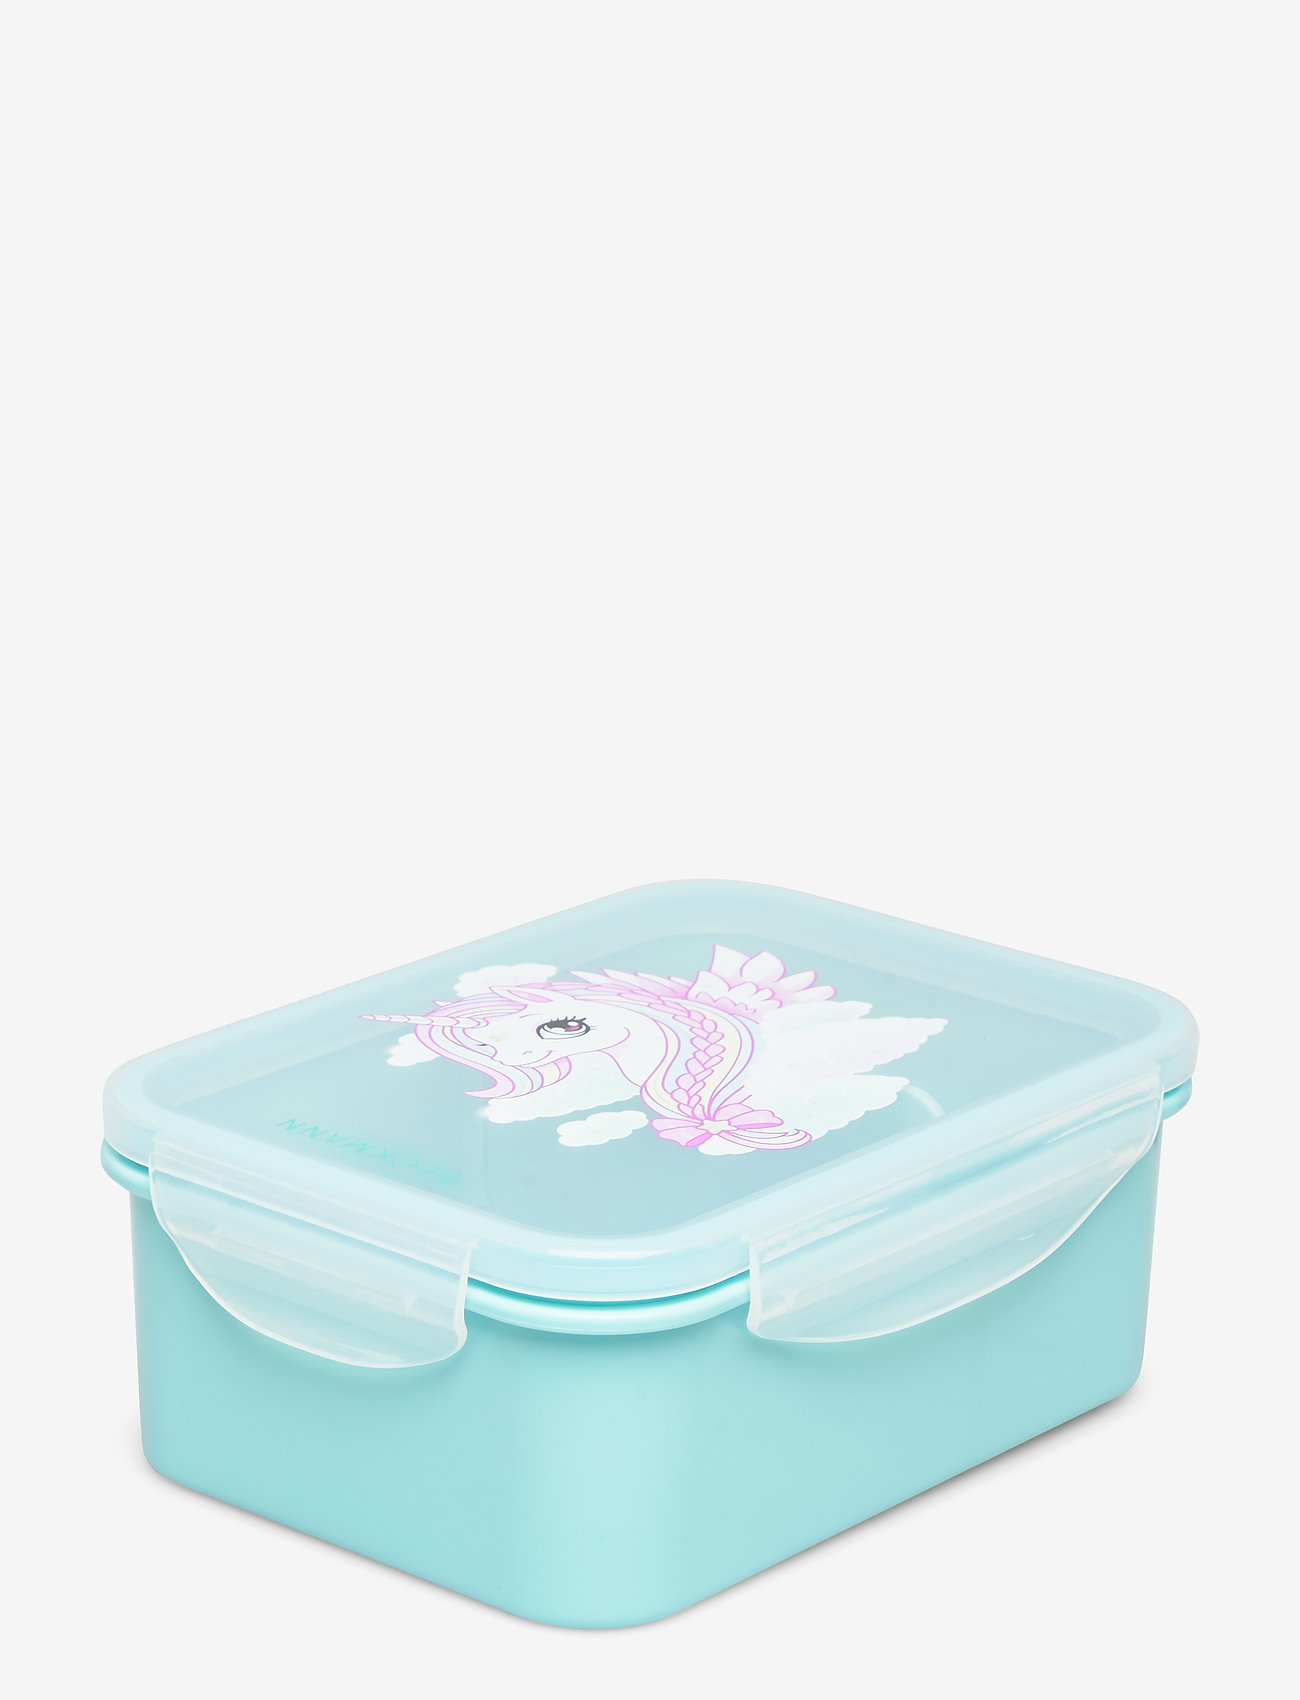 Beckmann of Norway - Lunch Box - Unicorn - lowest prices - turqouise - 0